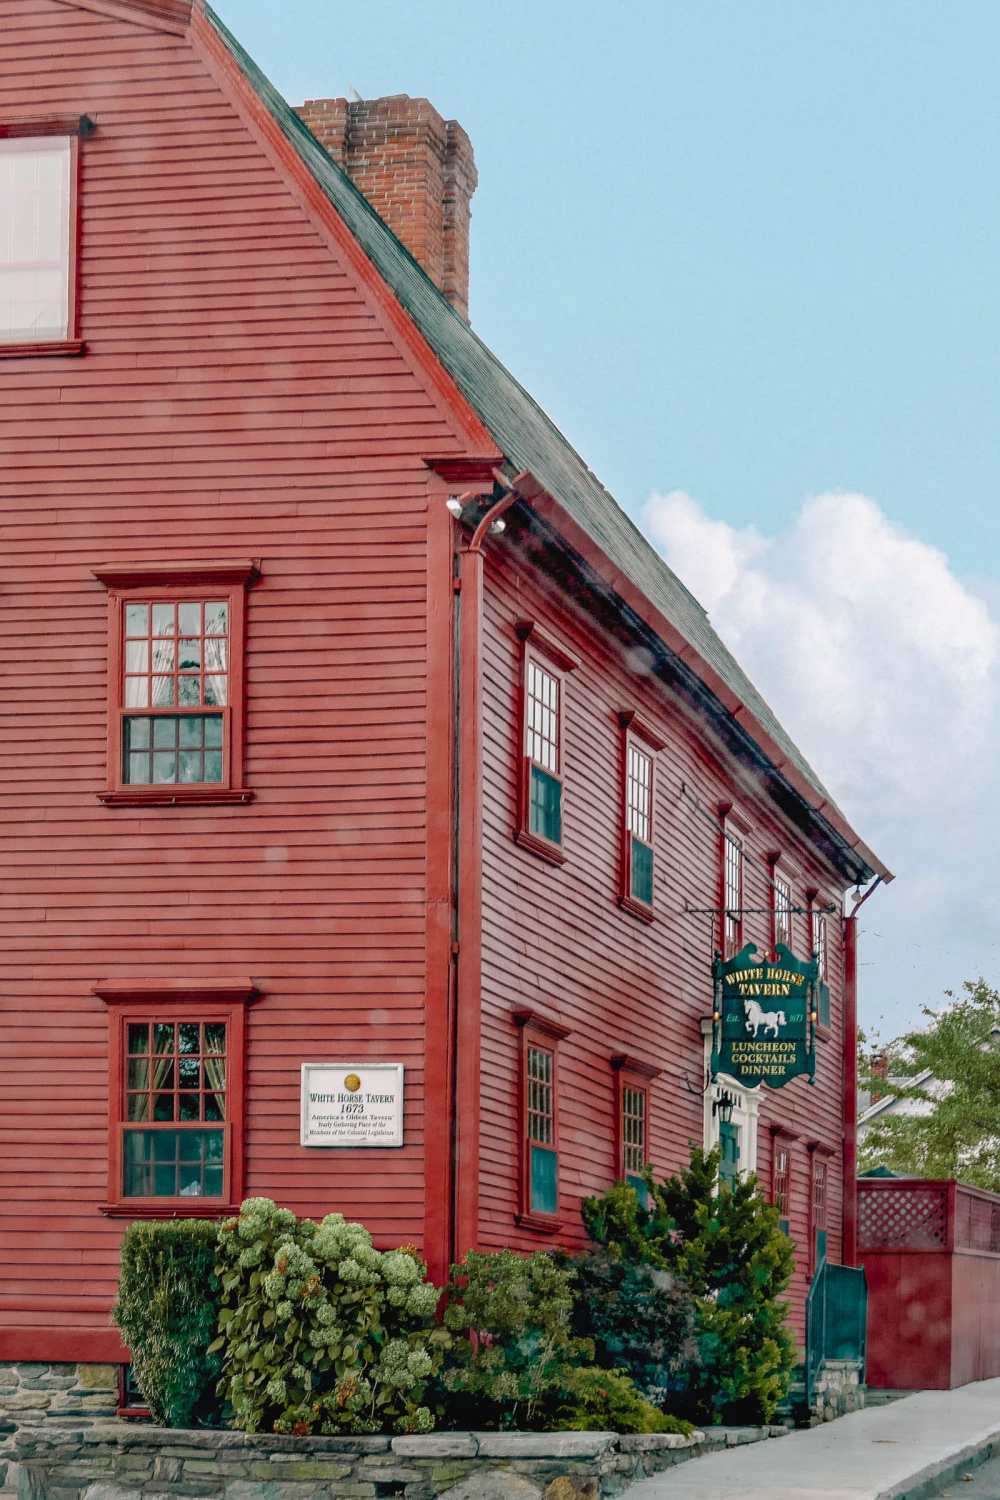 Oldest Tavern and pub in the USA